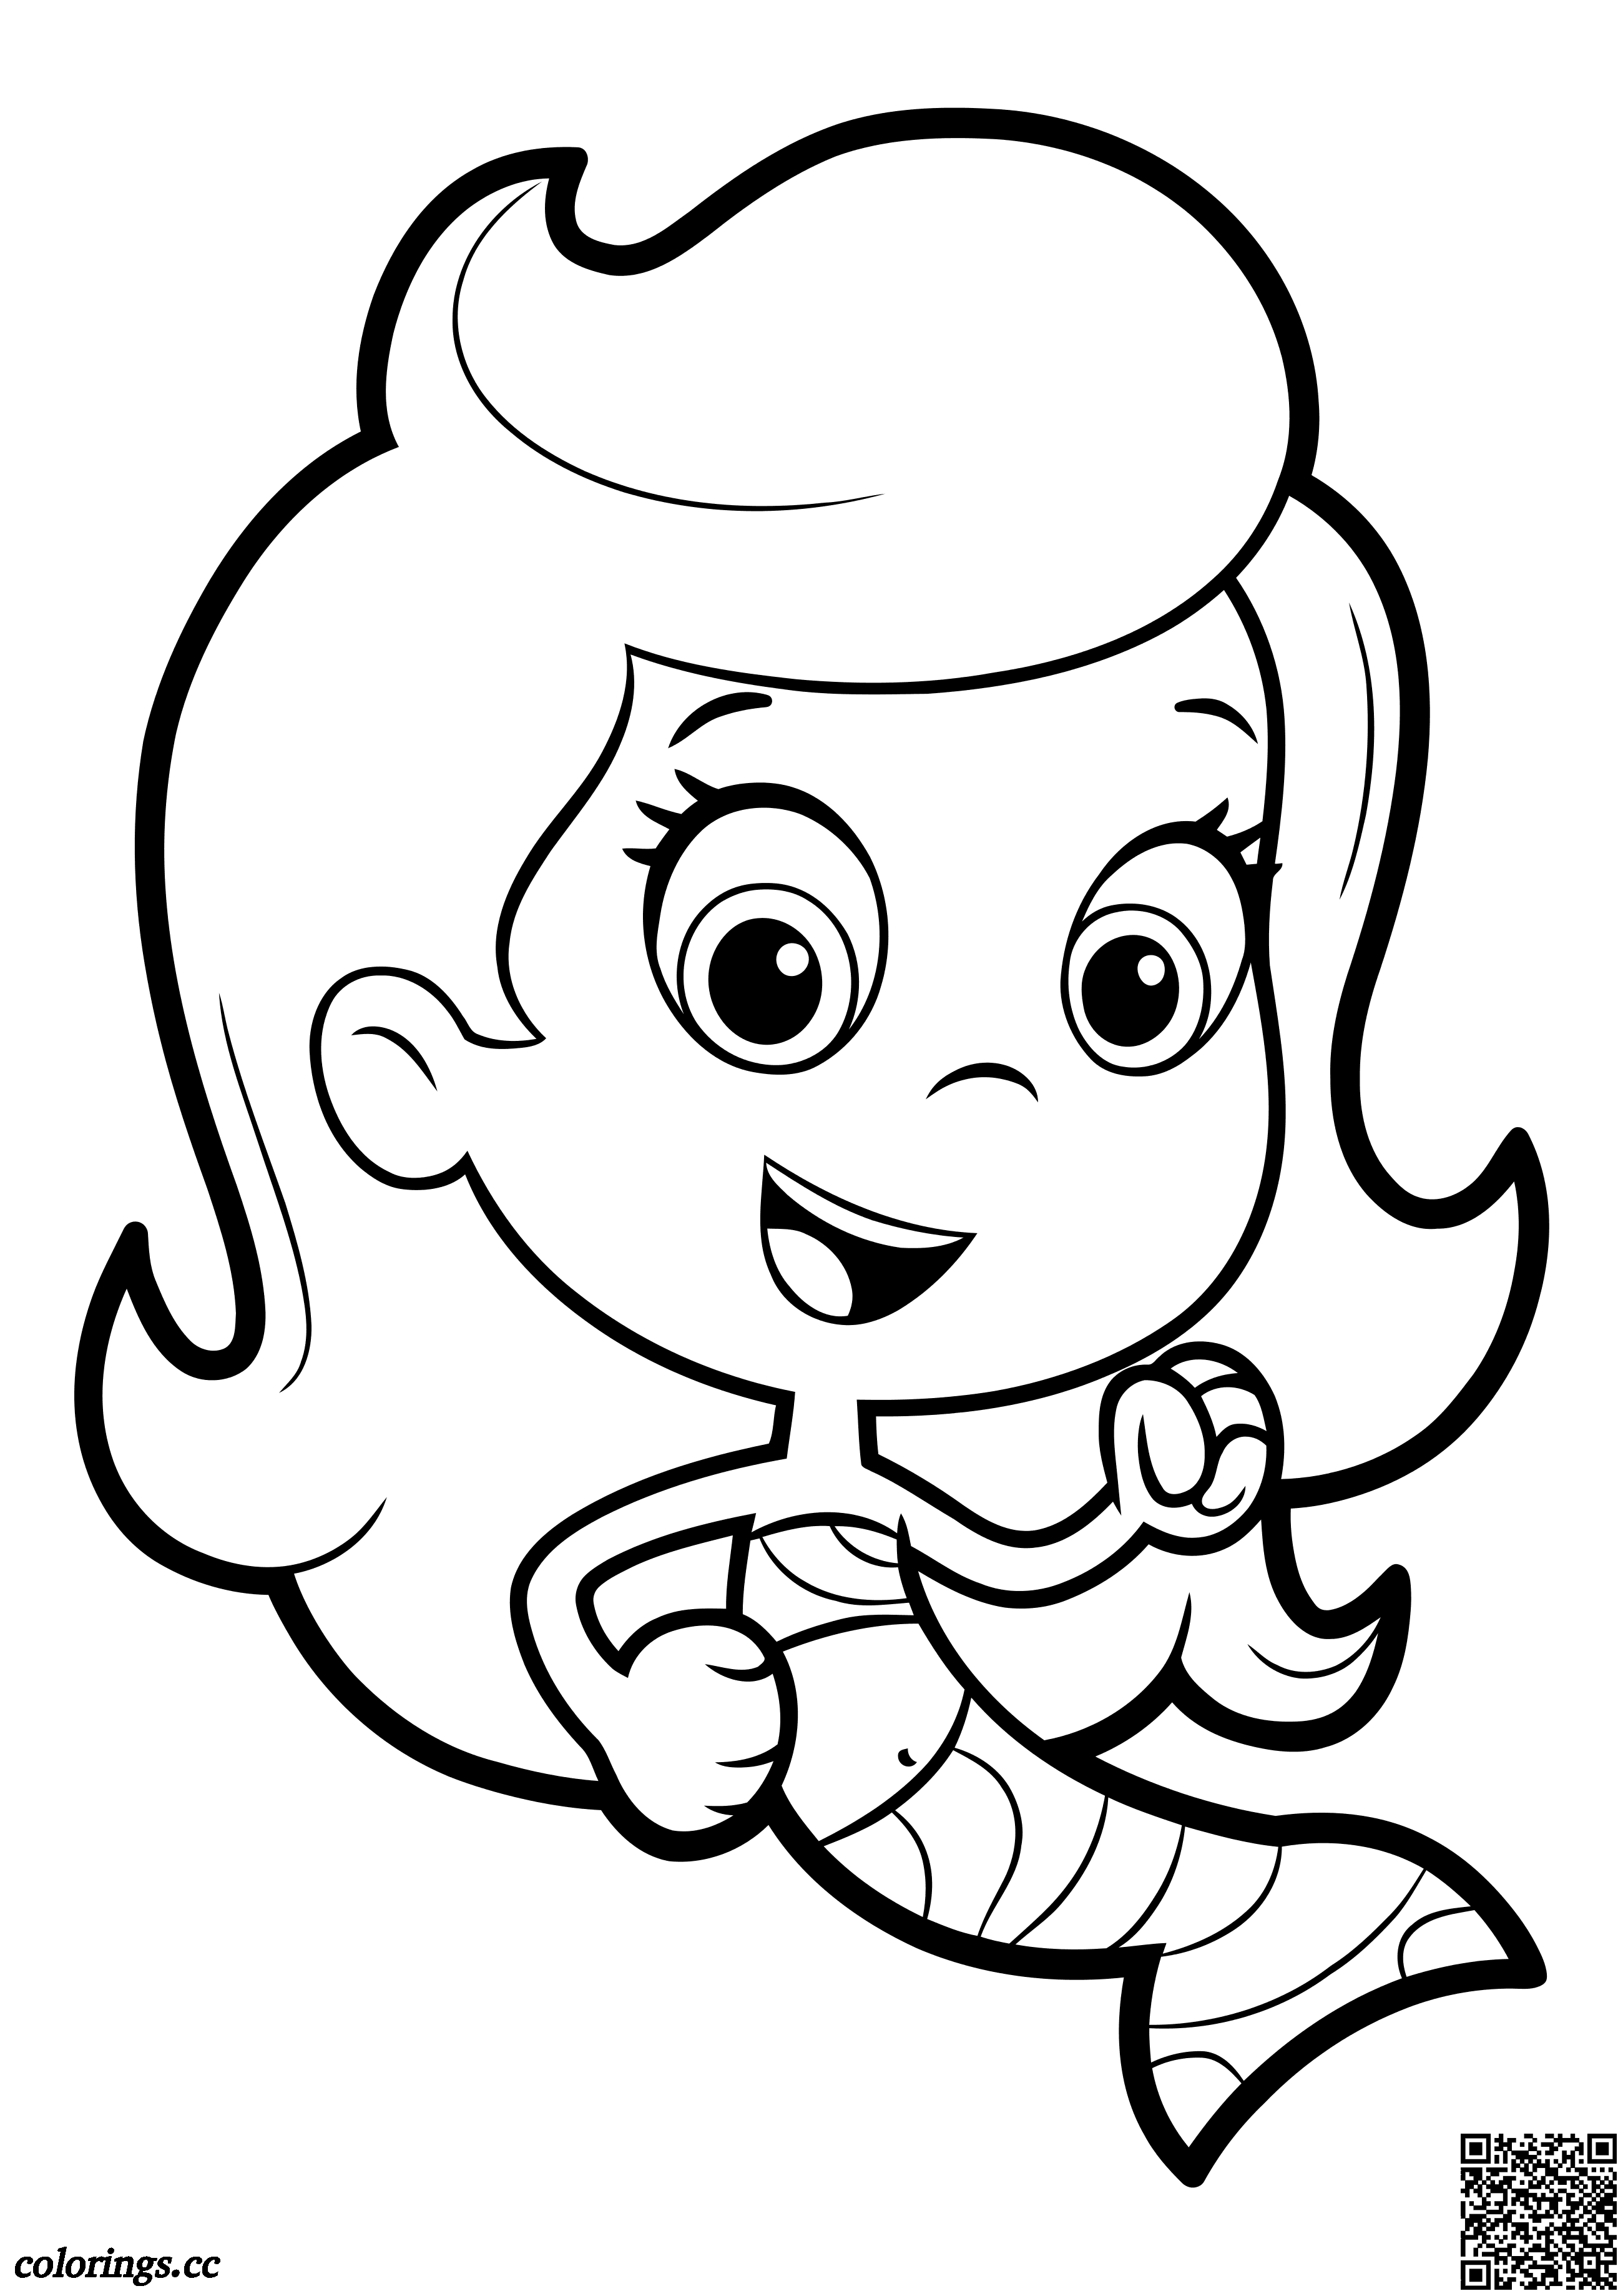 Molly Bubble Guppies Coloring Pages L Fun Coloring Activity For Kids